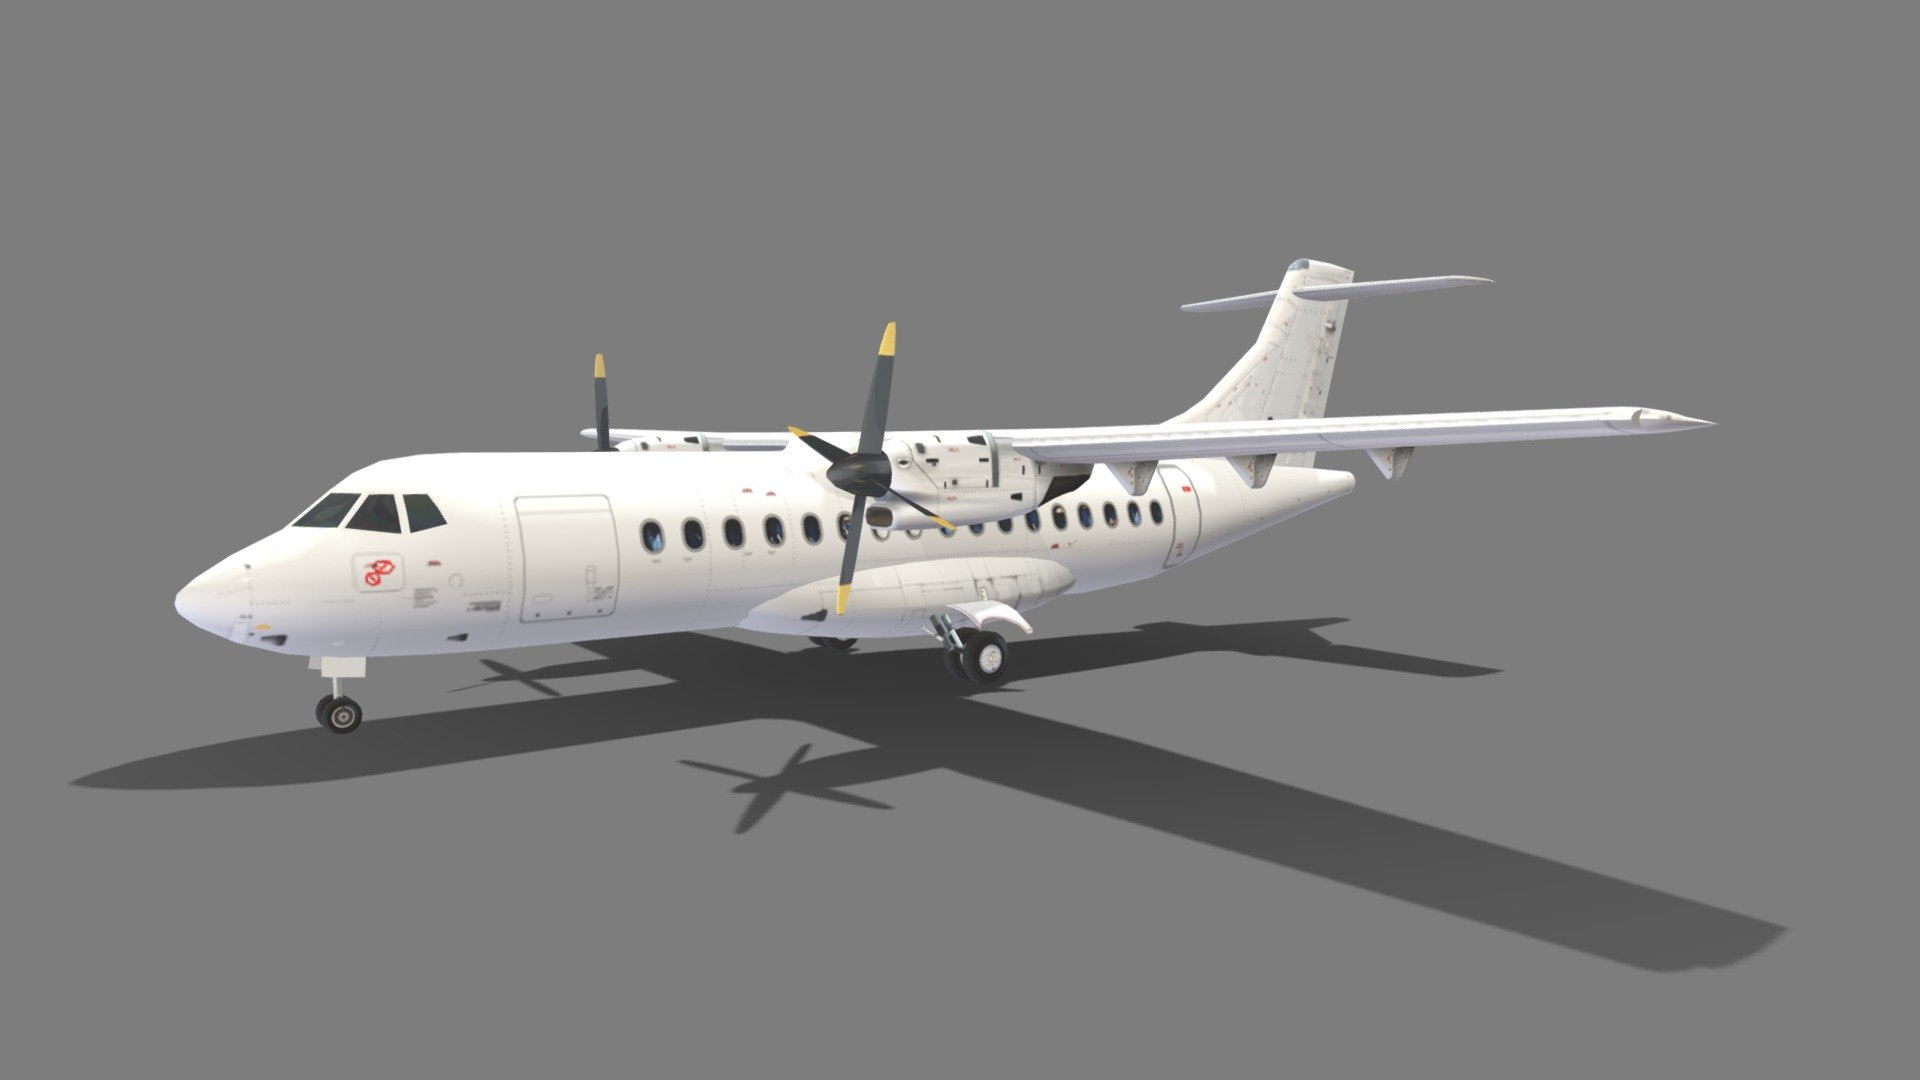 During the 1980s, French aerospace company Aérospatiale and Italian aviation conglomerate Aeritalia merged their work on a new generation of regional aircraft. A new jointly owned company, ATR, was established to develop, manufacture, and market their first airliner, which was later designated as the ATR 42. 

ThIs model comes with a blank layered texture, providing a clean slate for customization. This allows you to apply your own color schemes, or decals.

this is a static, non rigged, non animated, Lowpoly mesh, 2048 psd template layered texture, for MSFS or XPlane Scenery Airport development , standard materials, enough detailed just to be seen as part of an scene without consuming GPU resources. open doors and closed doors model included

thanks for looking! dont forget to check my other models - ATR 42  static Low poly Blank - Buy Royalty Free 3D model by Hangarcerouno 3d model